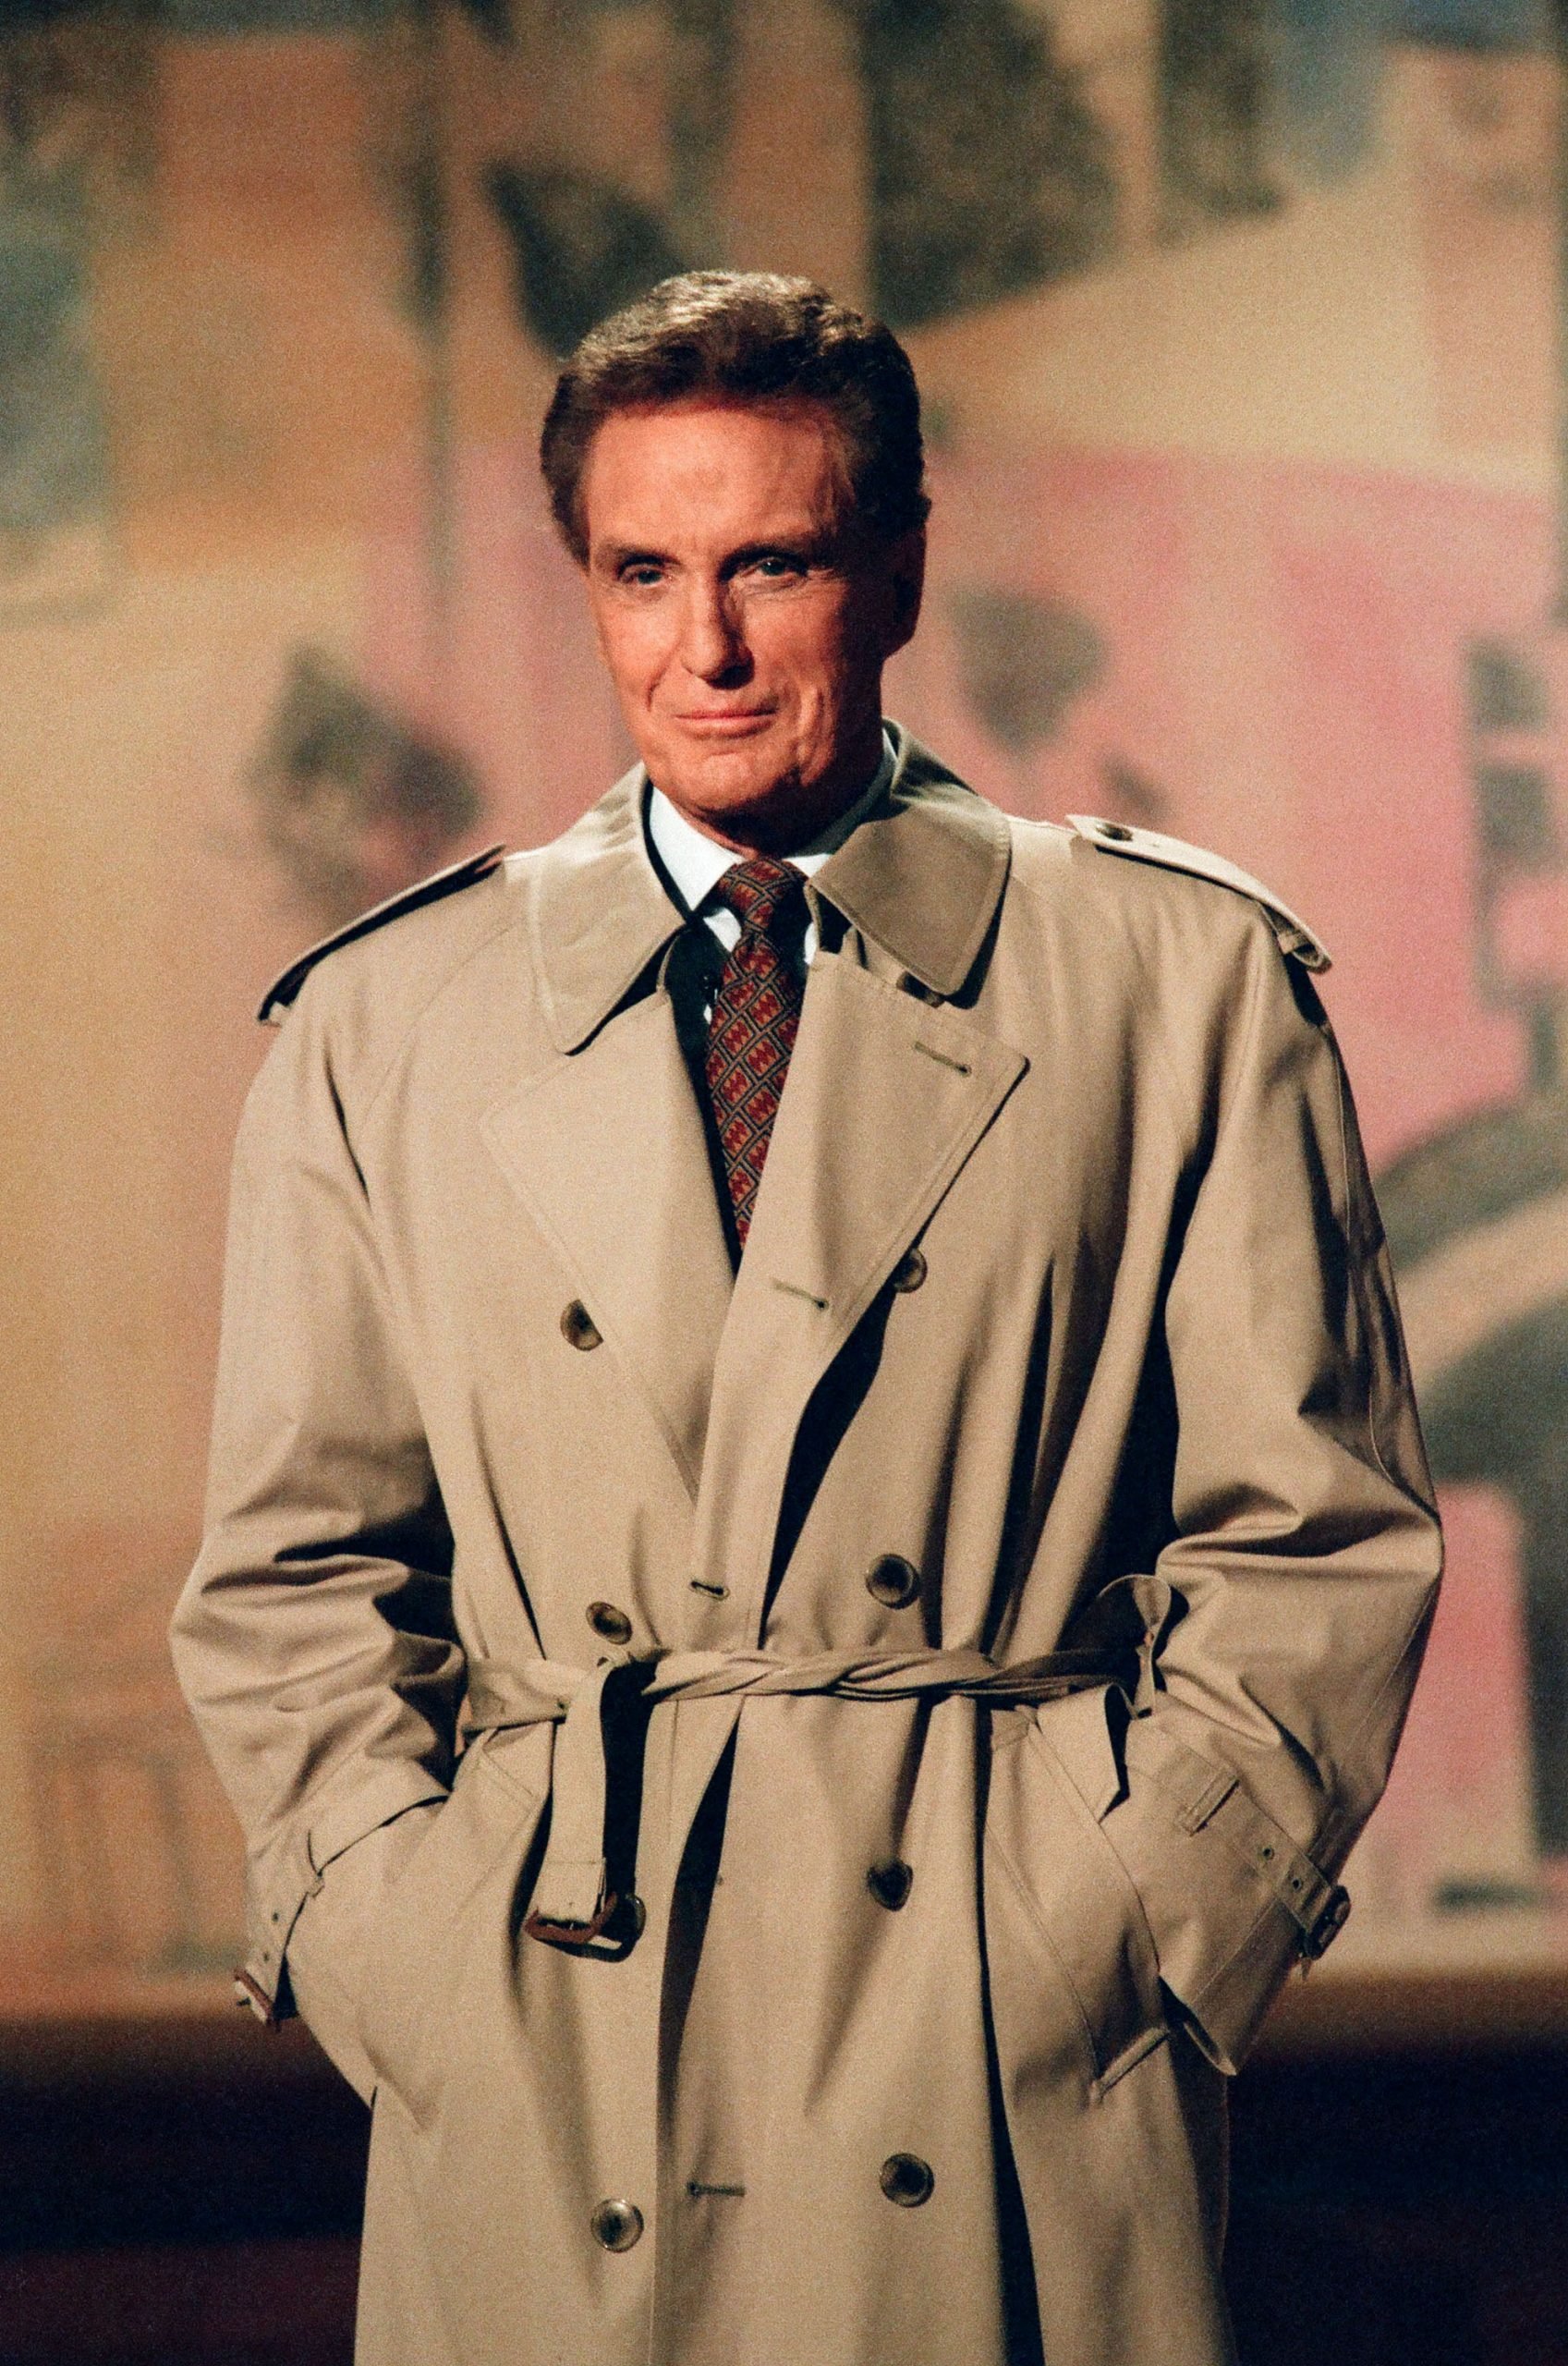 robert stack unsolved mysteries episodes streaming